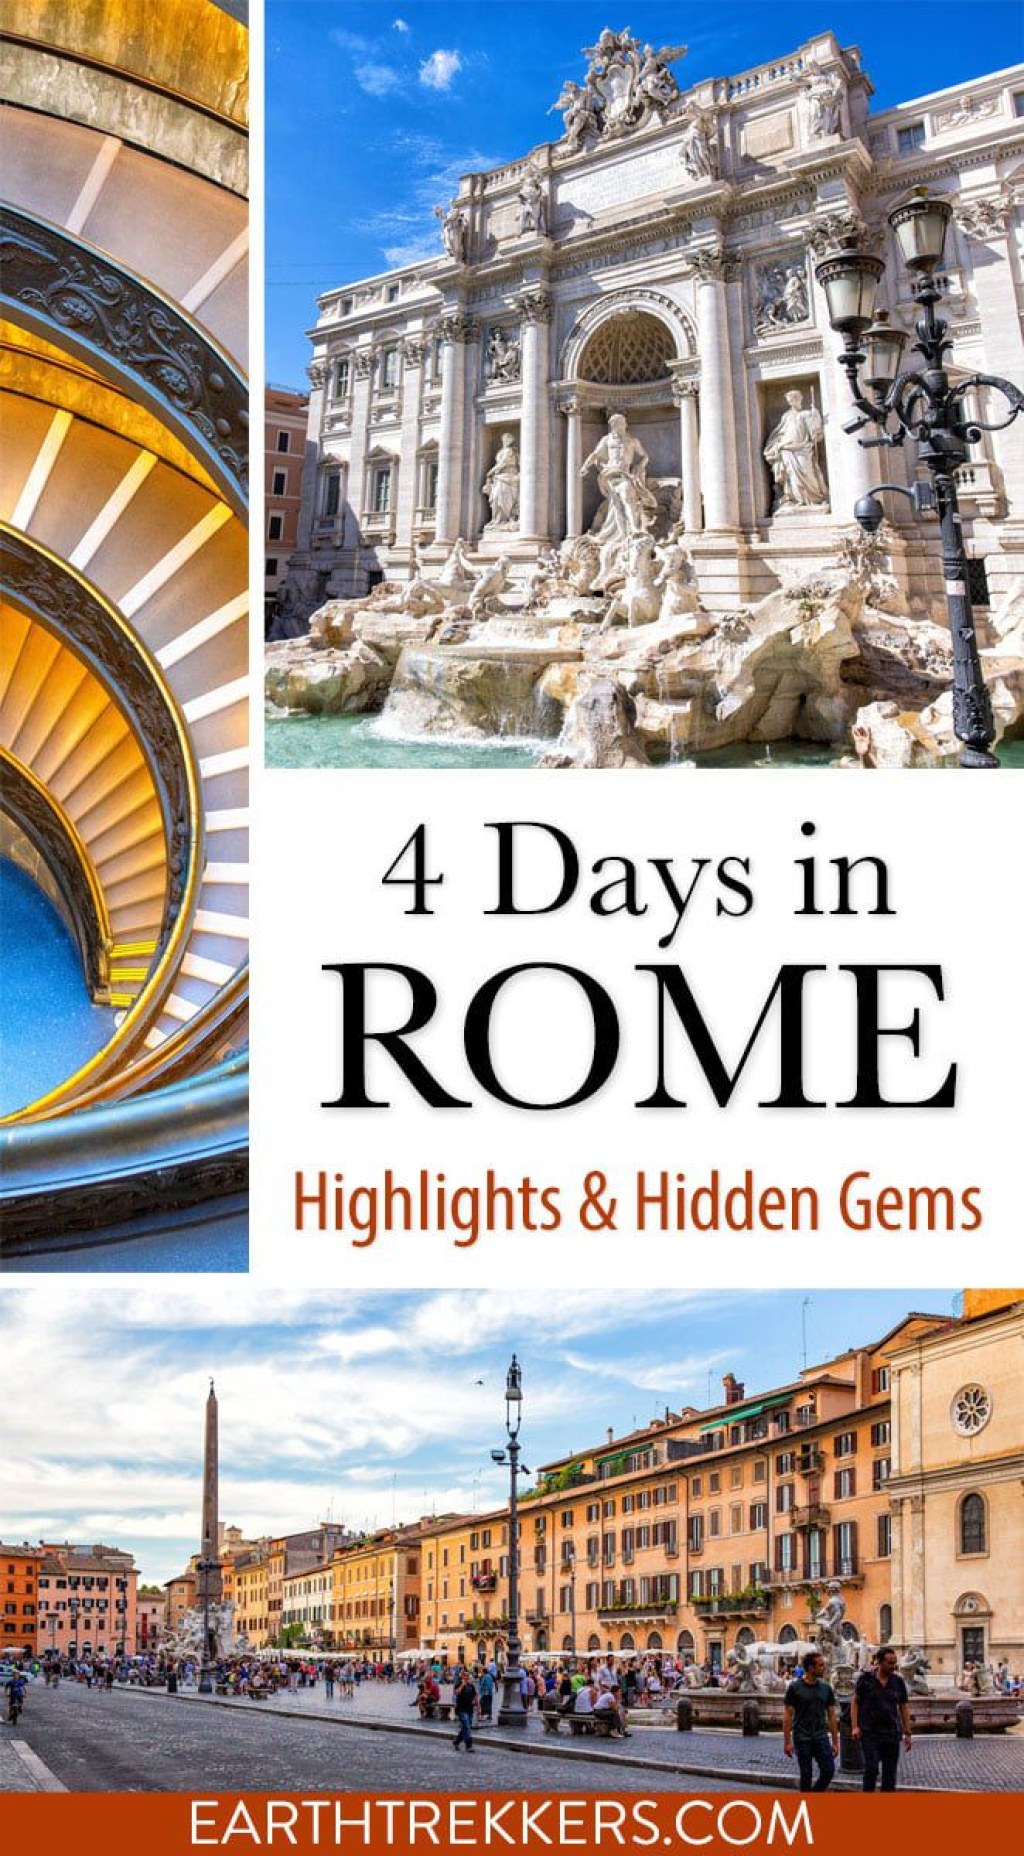 italy trip itinerary 4 days - Days in Rome Itinerary: Highlights & Hidden Gems – Earth Trekkers